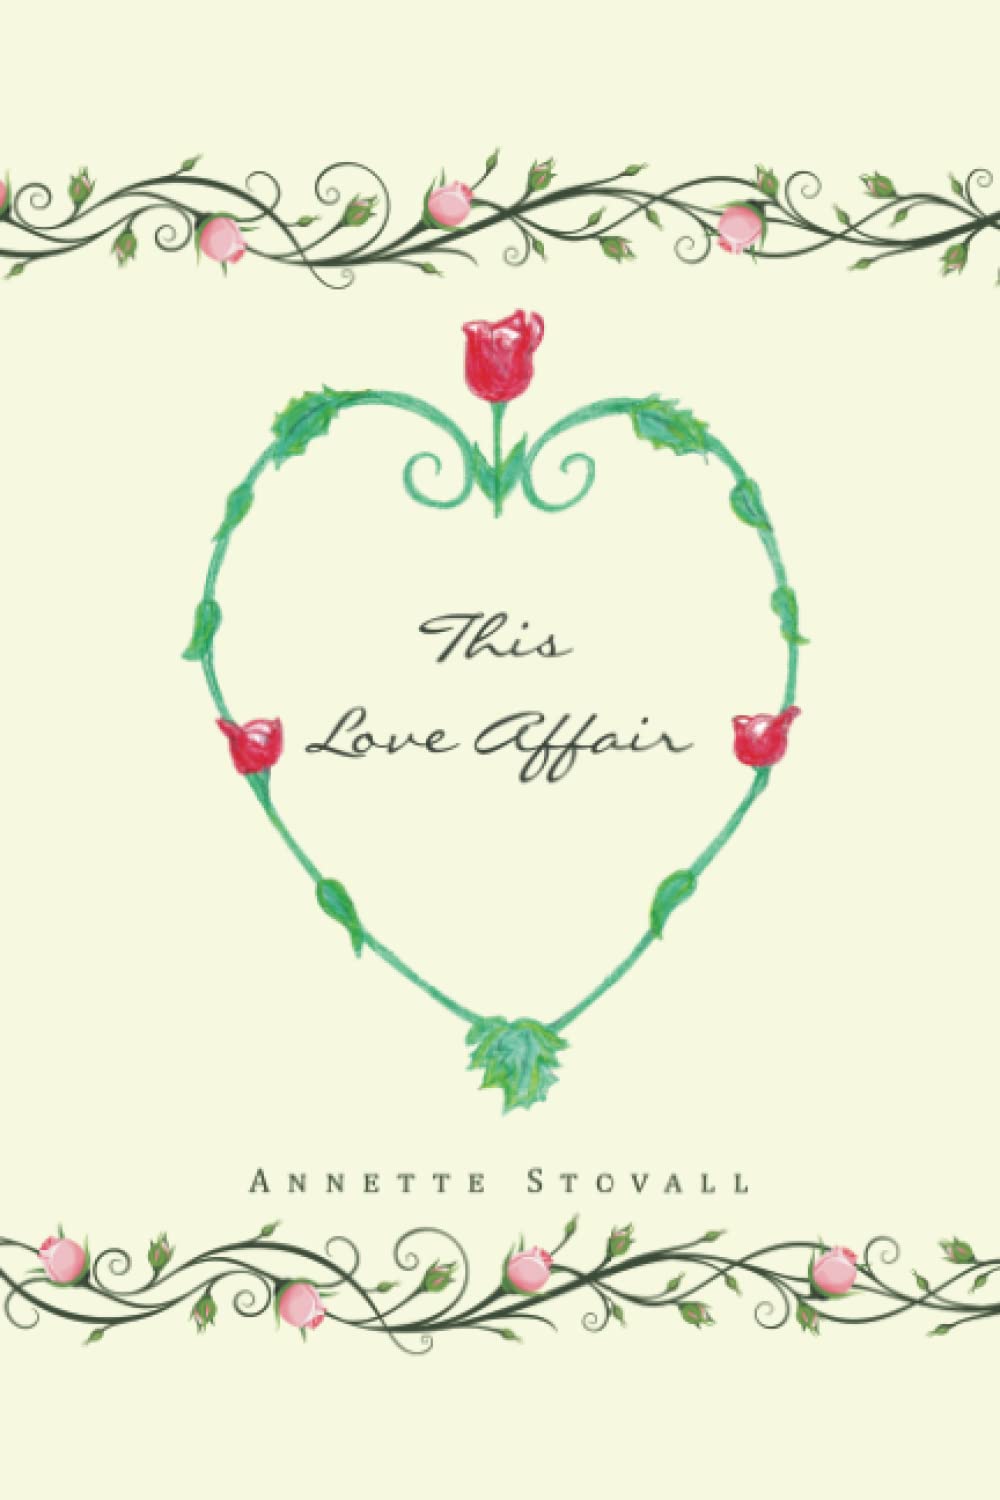 ‘This Love Affair’ by Annette Stovall Celebrates the Genuine Meaning of Love, Peace, and Happiness